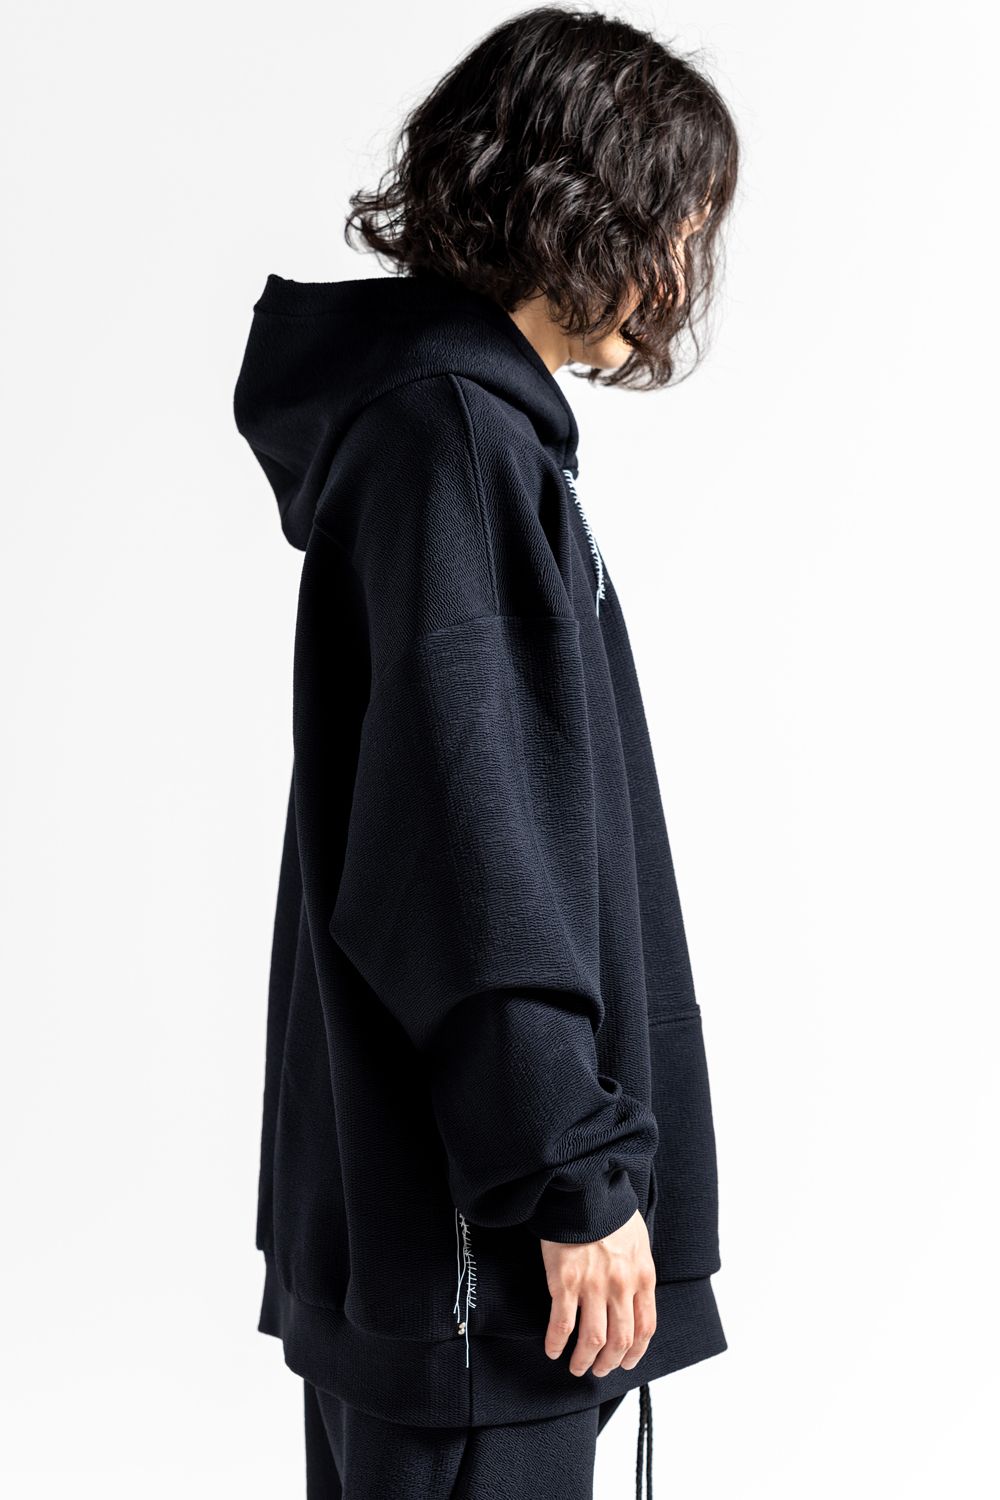 KMRii - 【21AW】Nylon Stretch Hooded Pullover [BLACK] - ナイロン 